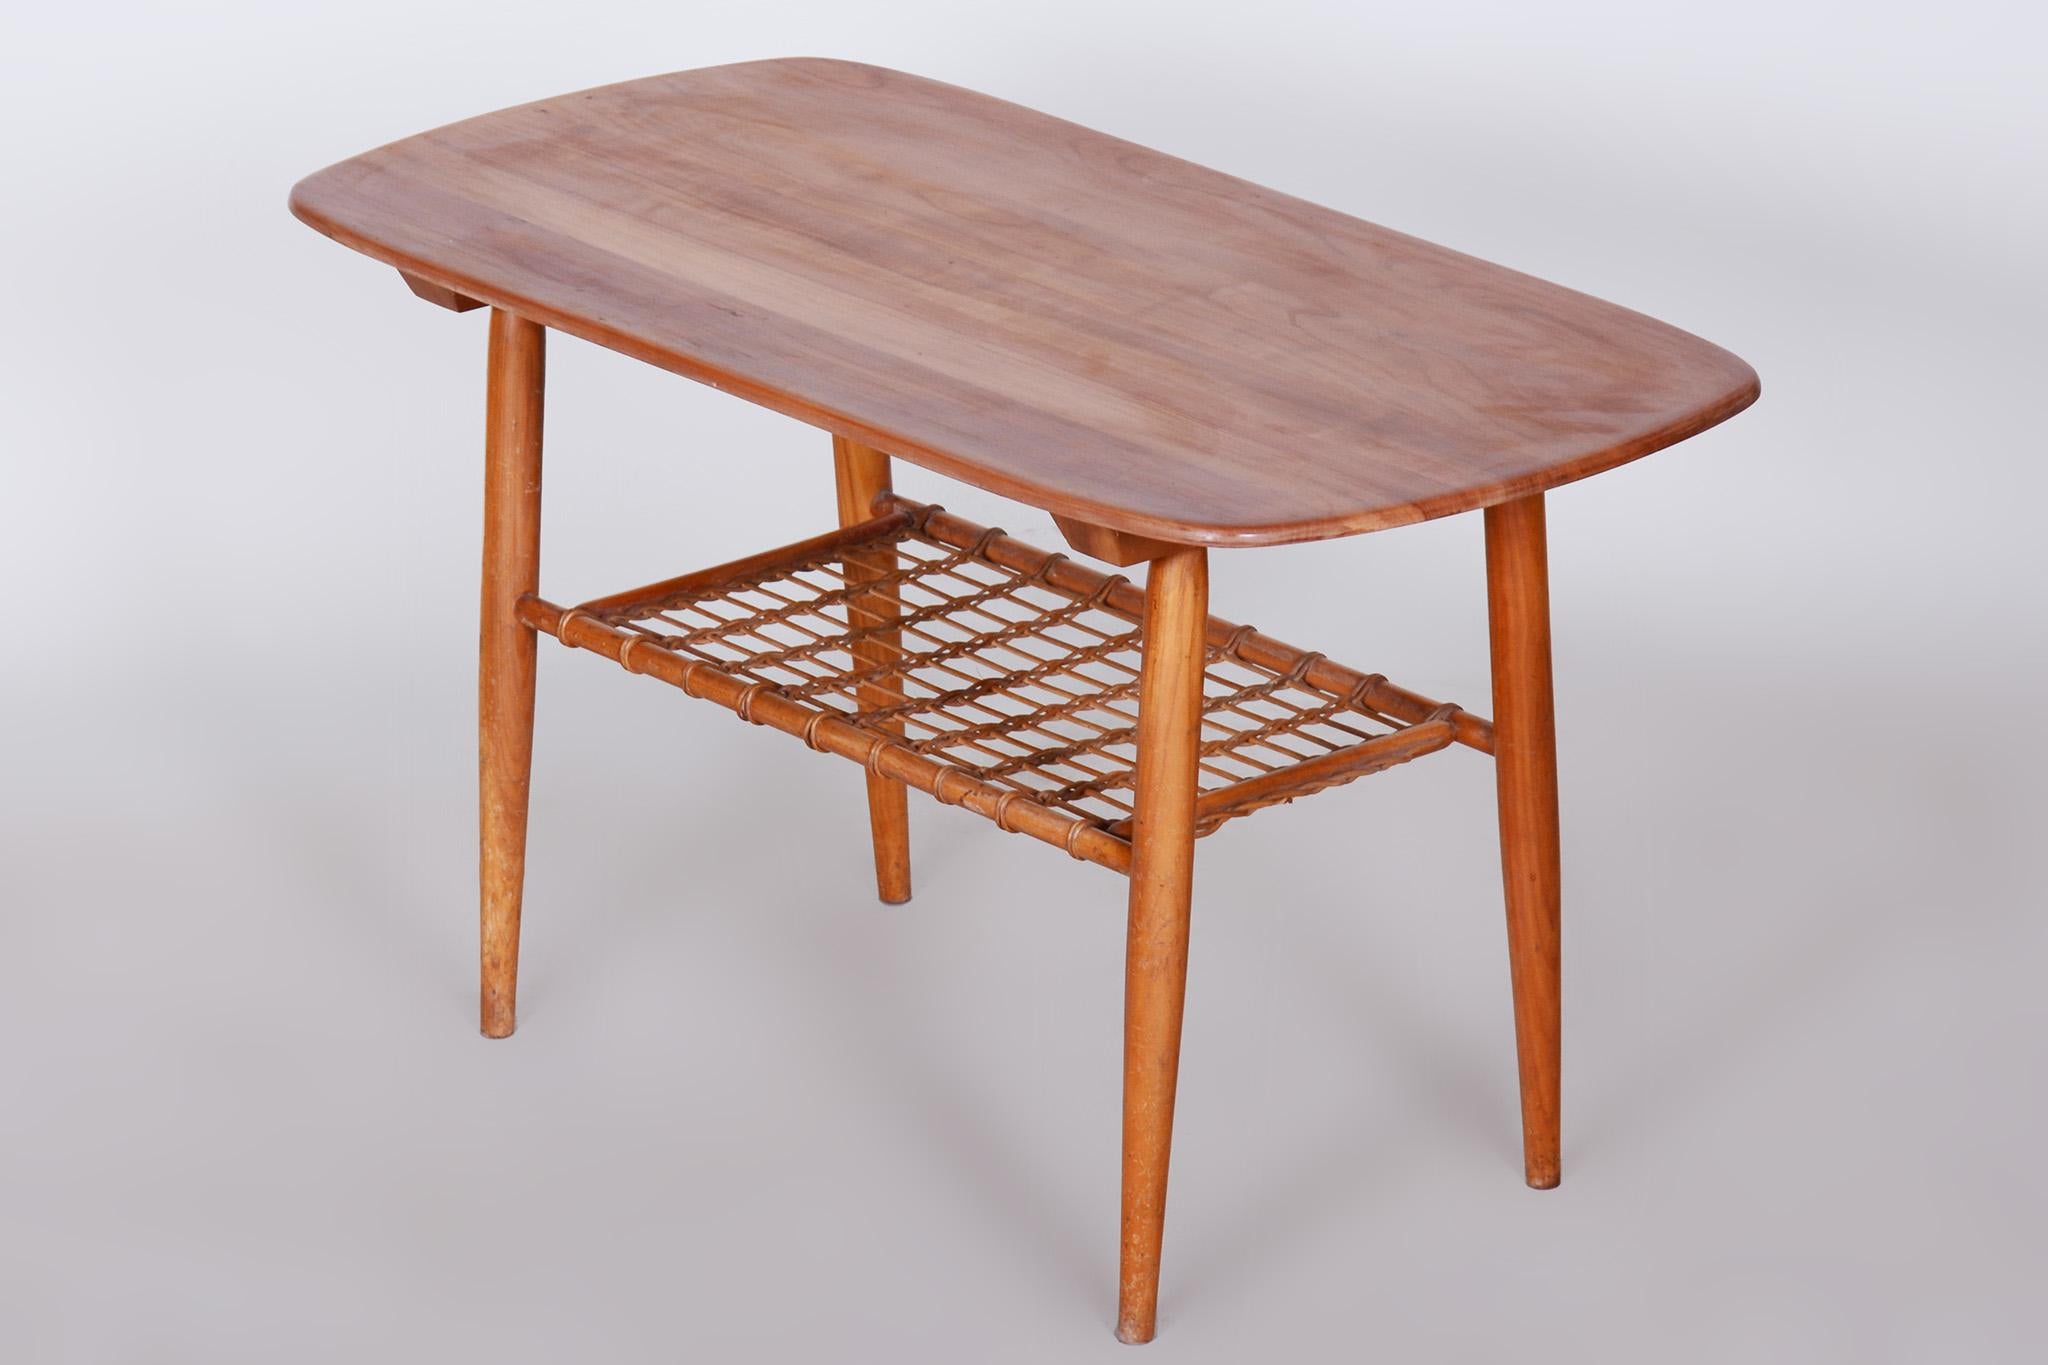 Restored Mid-Century Style Coffee Table, Cherry-Tree, Rattan, 1950s, Czechia For Sale 1